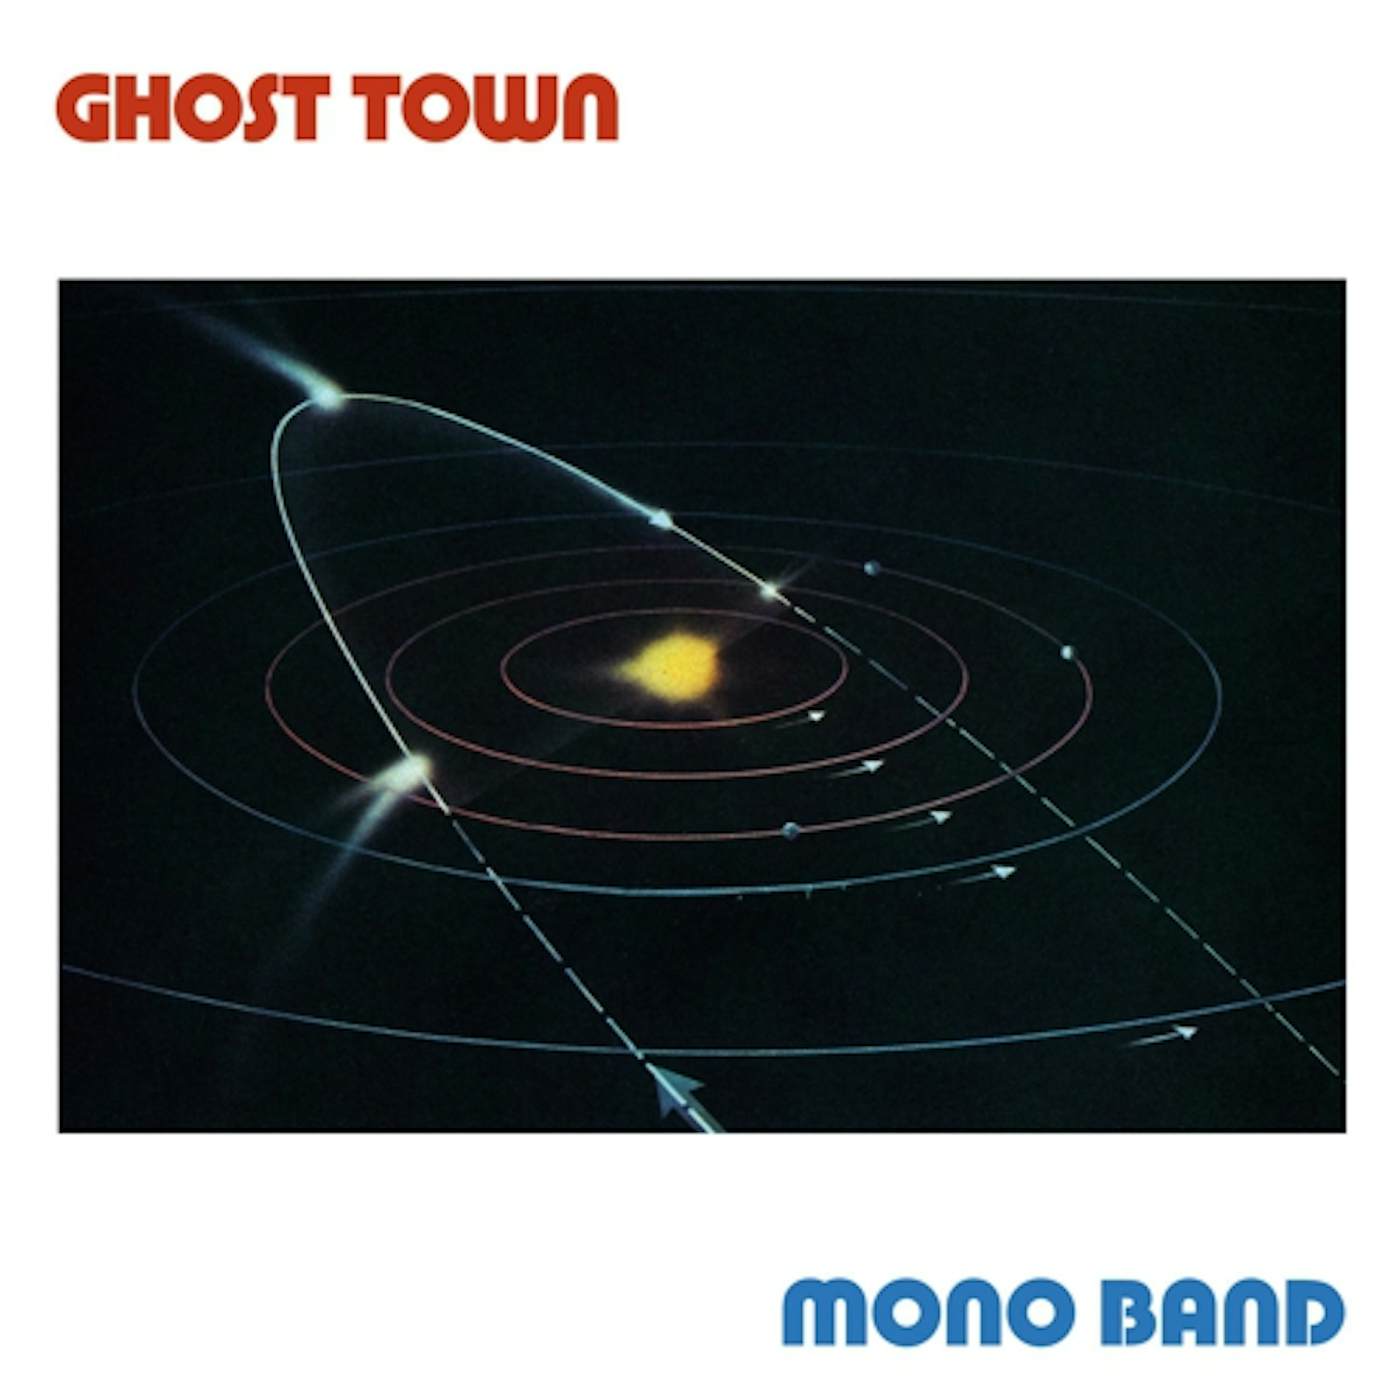 Mono Band Ghost Town Vinyl Record